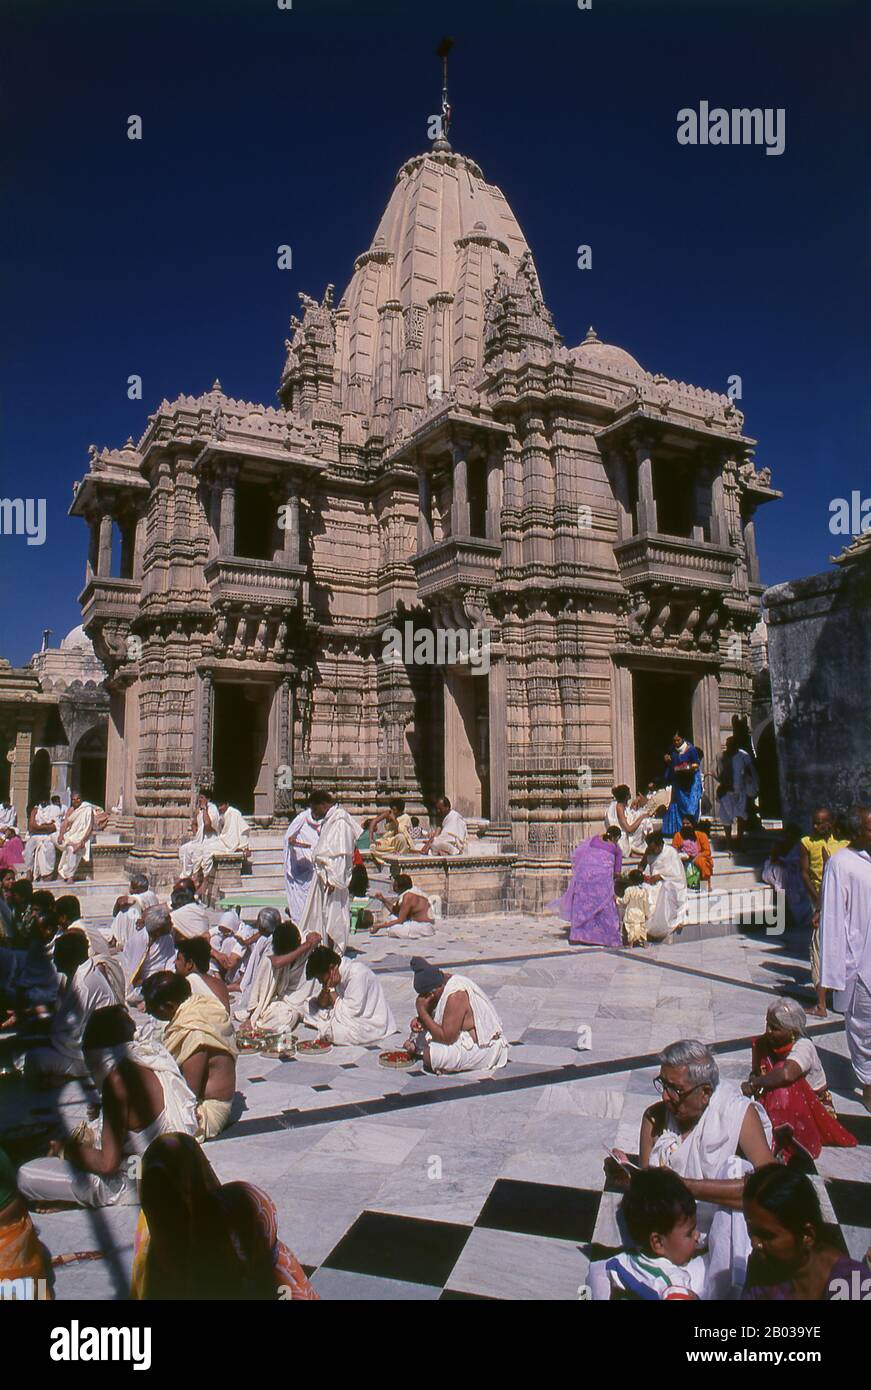 The Jain's sacred site of Shatrunjaya contains hundreds of Palitana temples built mostly between the 11th Century and 16th Century CE. The Shatrunjaya Hills were sanctified when Rishabha, the first tirthankara (omniscient Teaching God) of Jainism, gave his first sermon in the temple on the hill top. The ancient history of the hills is also traced to Pundarika Swami, a chief Ganadhara and grandson of Rishabha, who attained salvation here. His shrine located opposite to the main Adinath temple, built by his son Bharata, is also worshiped by pilgrims. Stock Photo